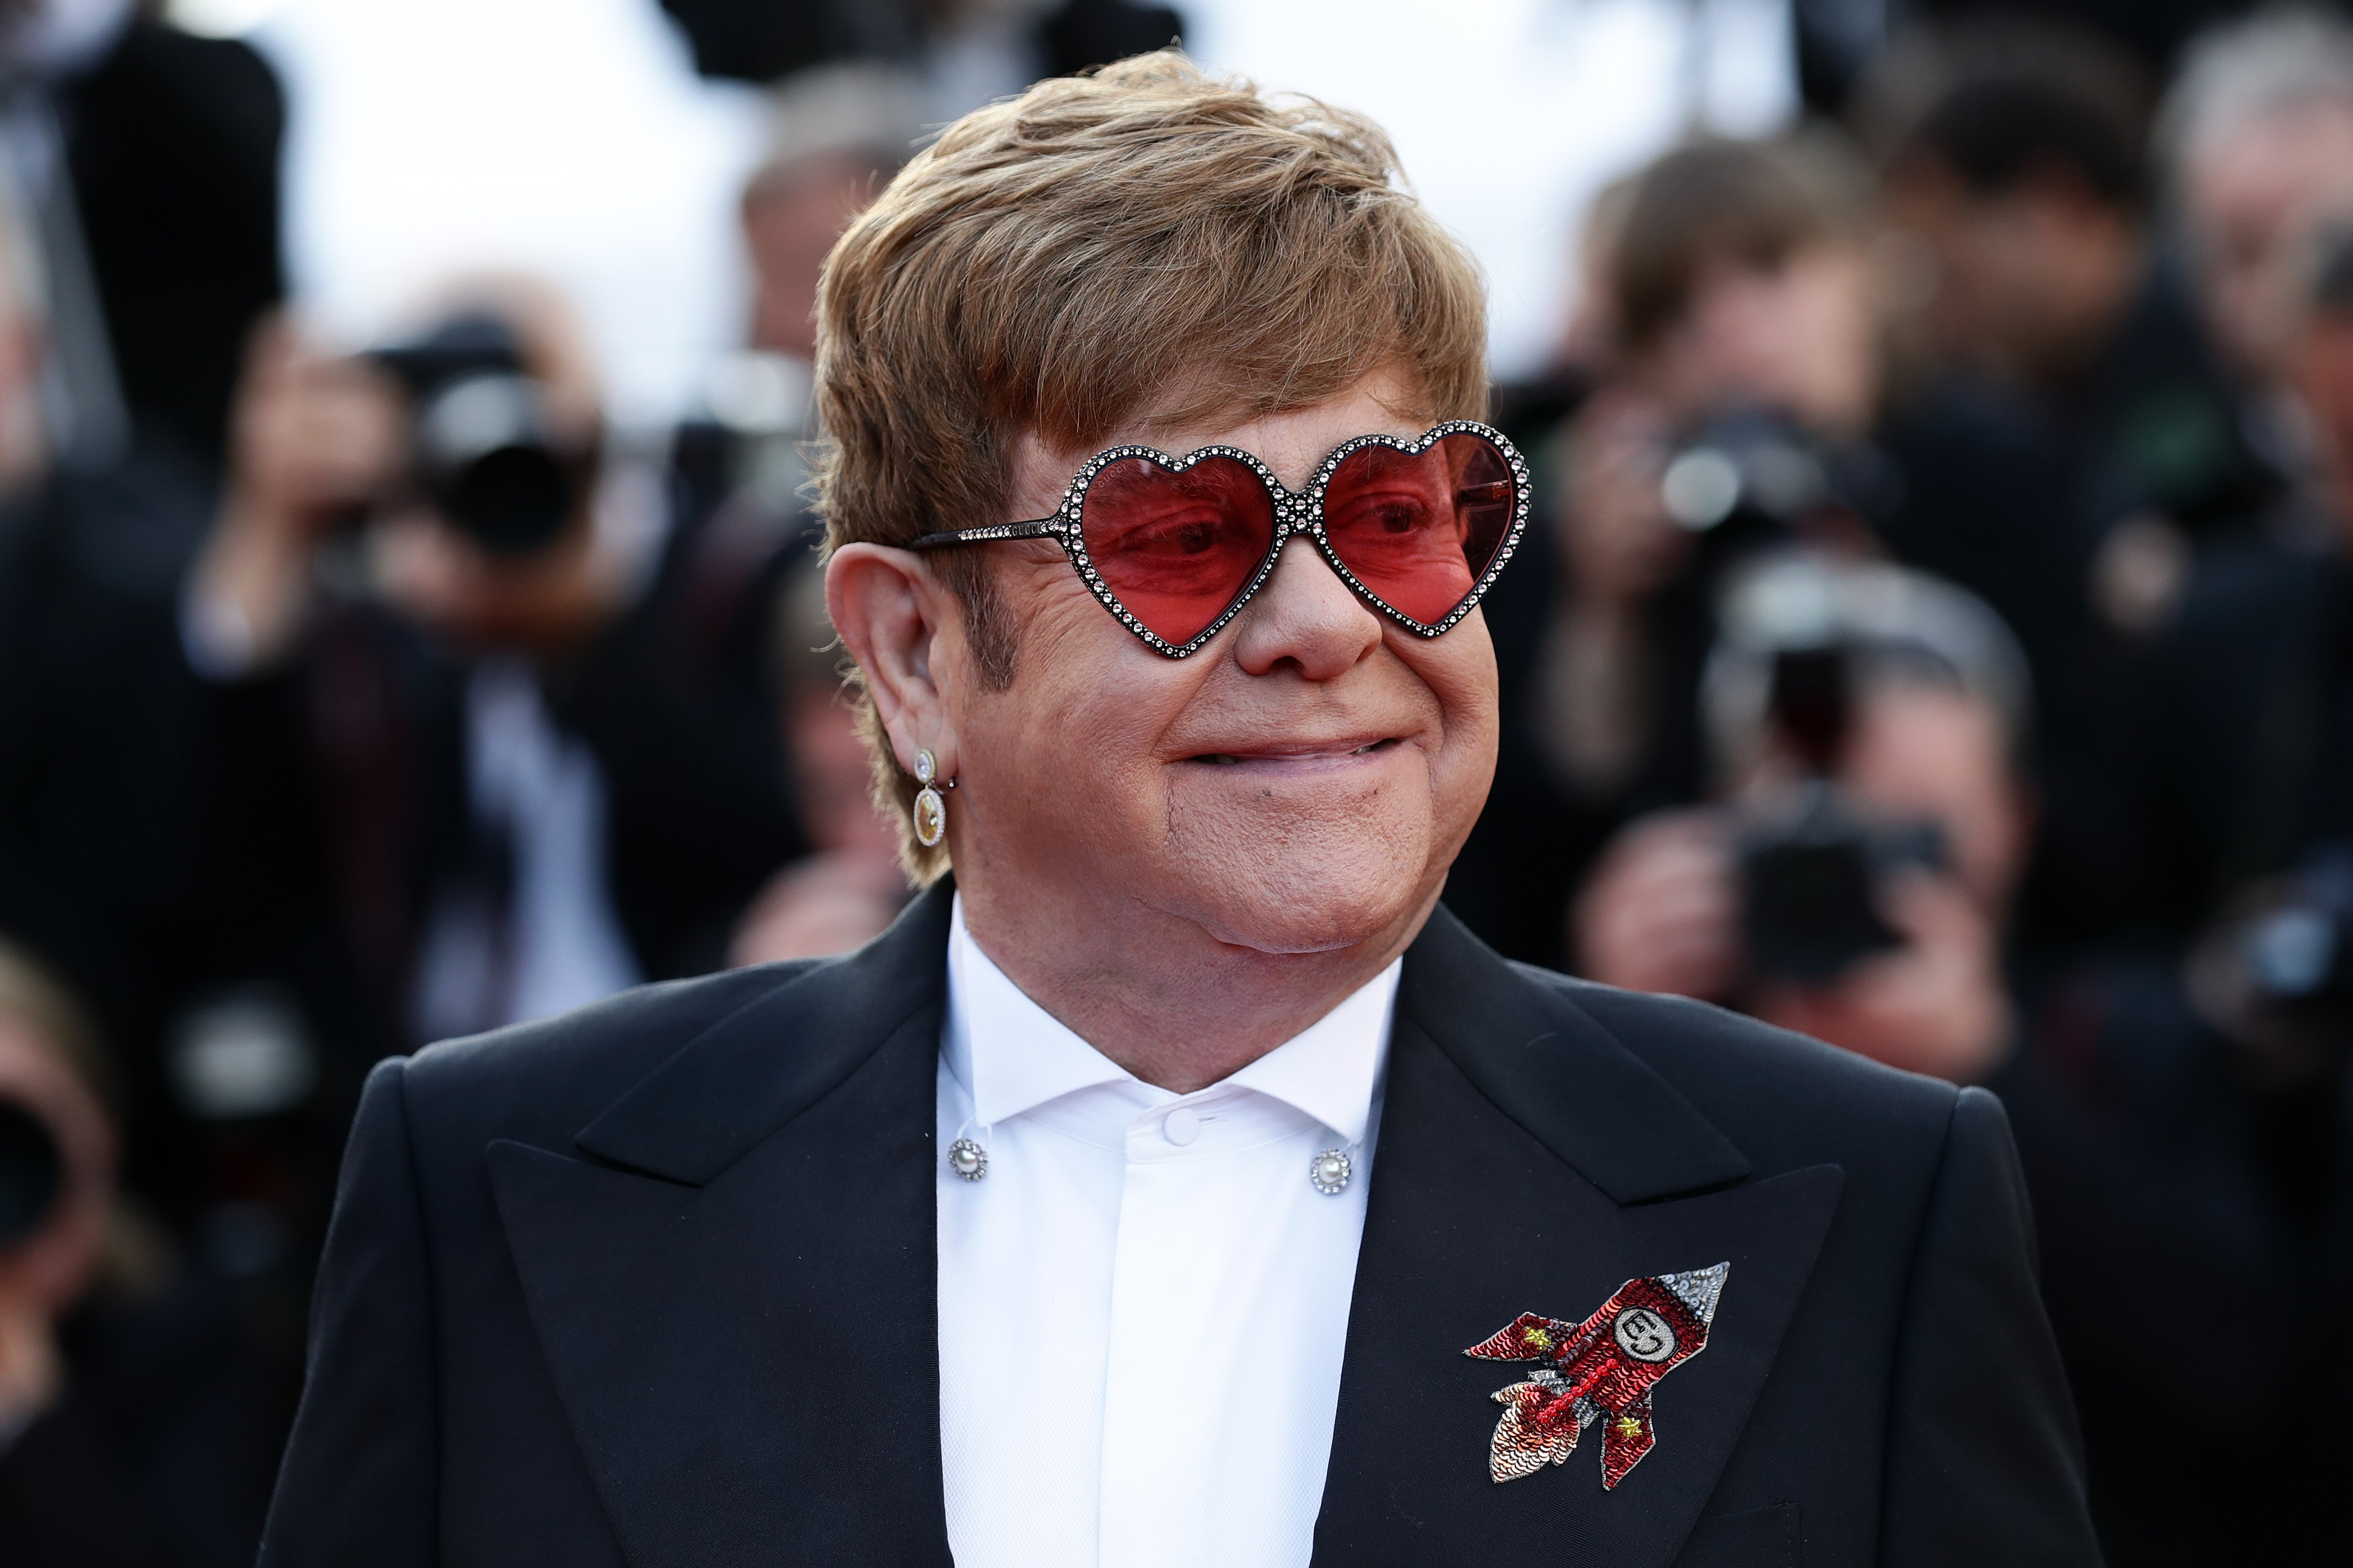 Sir Elton John attends the screening of "Rocketman" during the 72nd annual Cannes Film Festival on May 16, 2019, in Cannes, France. | Photo: Getty Images.